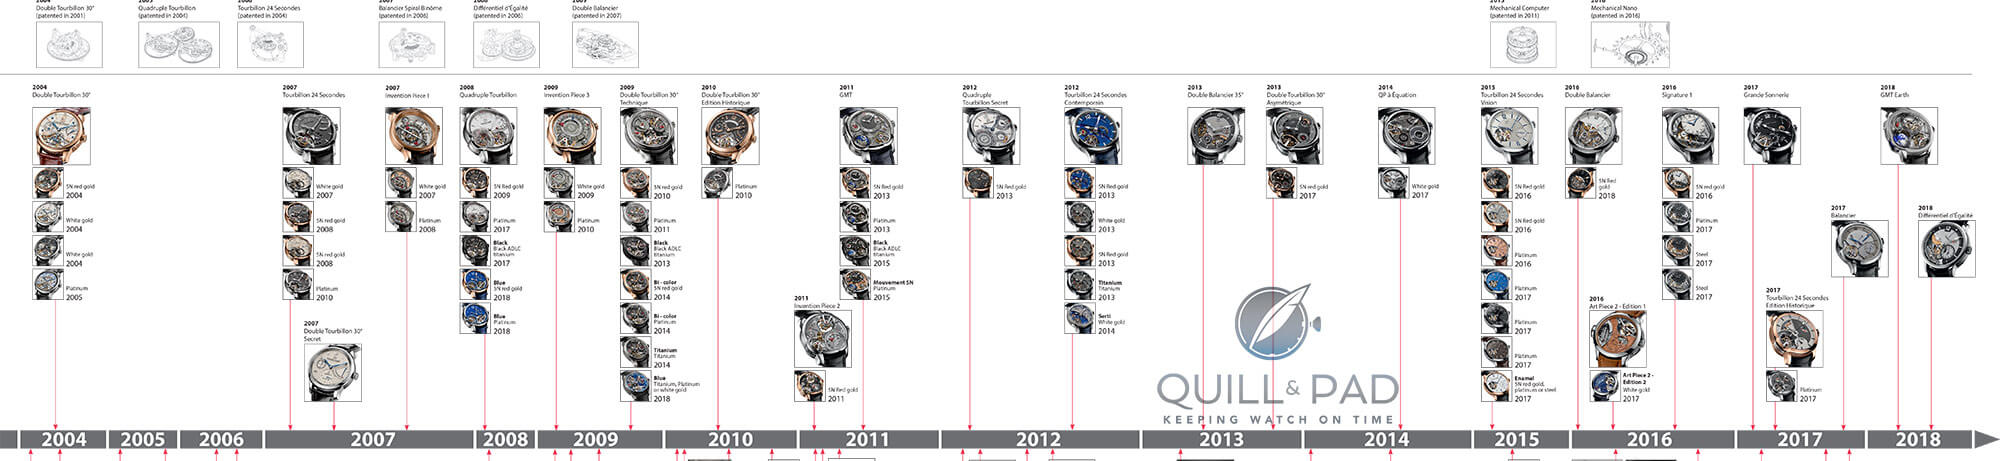 Timeline of Greubel Forsey inventions and timepieces